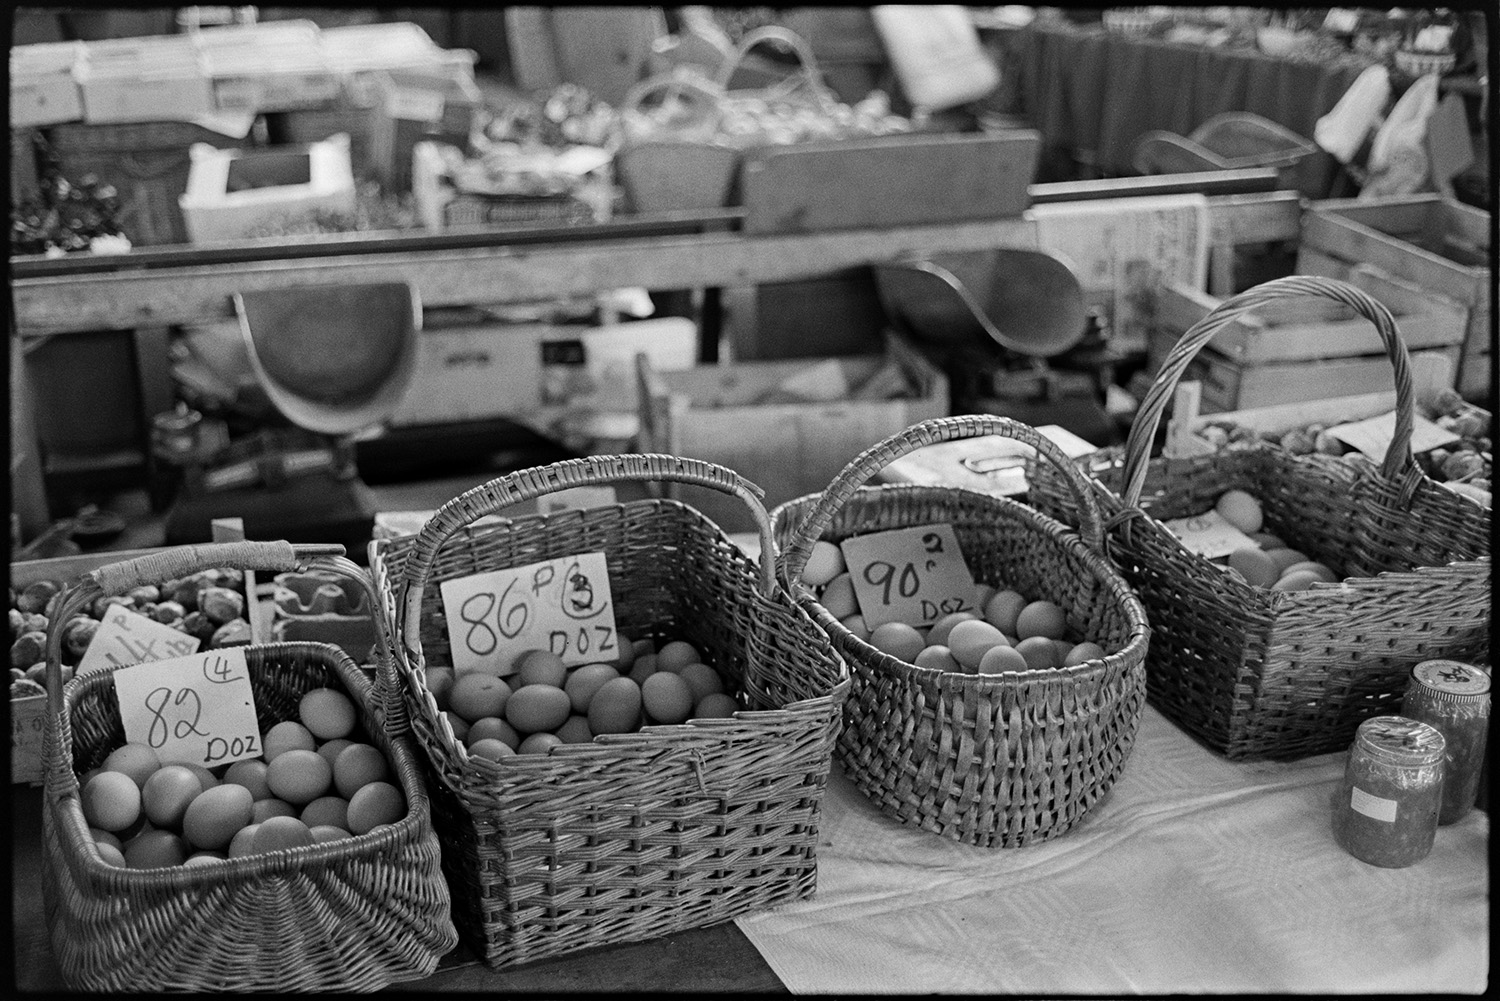 Pannier market, baskets of eggs, vegetables.
[Eggs in wicker baskets for sale at Bideford Pannier Market. Weighing scales, boxes and trays are visible in the background.]